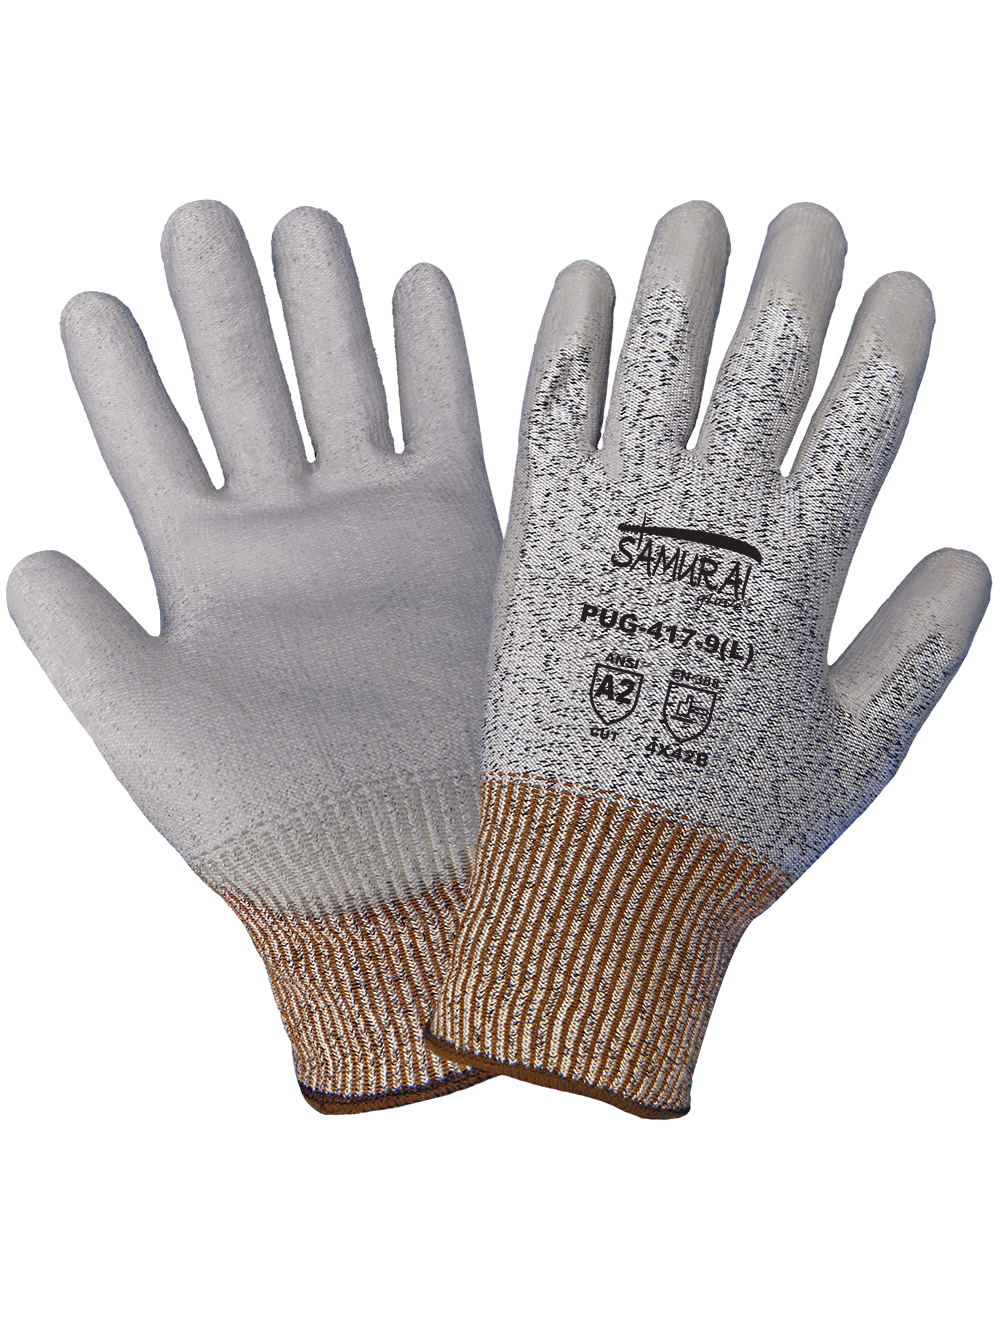 Global Glove and Samurai Safety Protection, Resistant Eye UHMWPE Protection Cut, Heat Gloves Stress, and - Glove® Polyurethane-Coated Protection, Resistant Cut Protection, Abrasion, PUG-417 Hand Cooling Tuffalene® Puncture